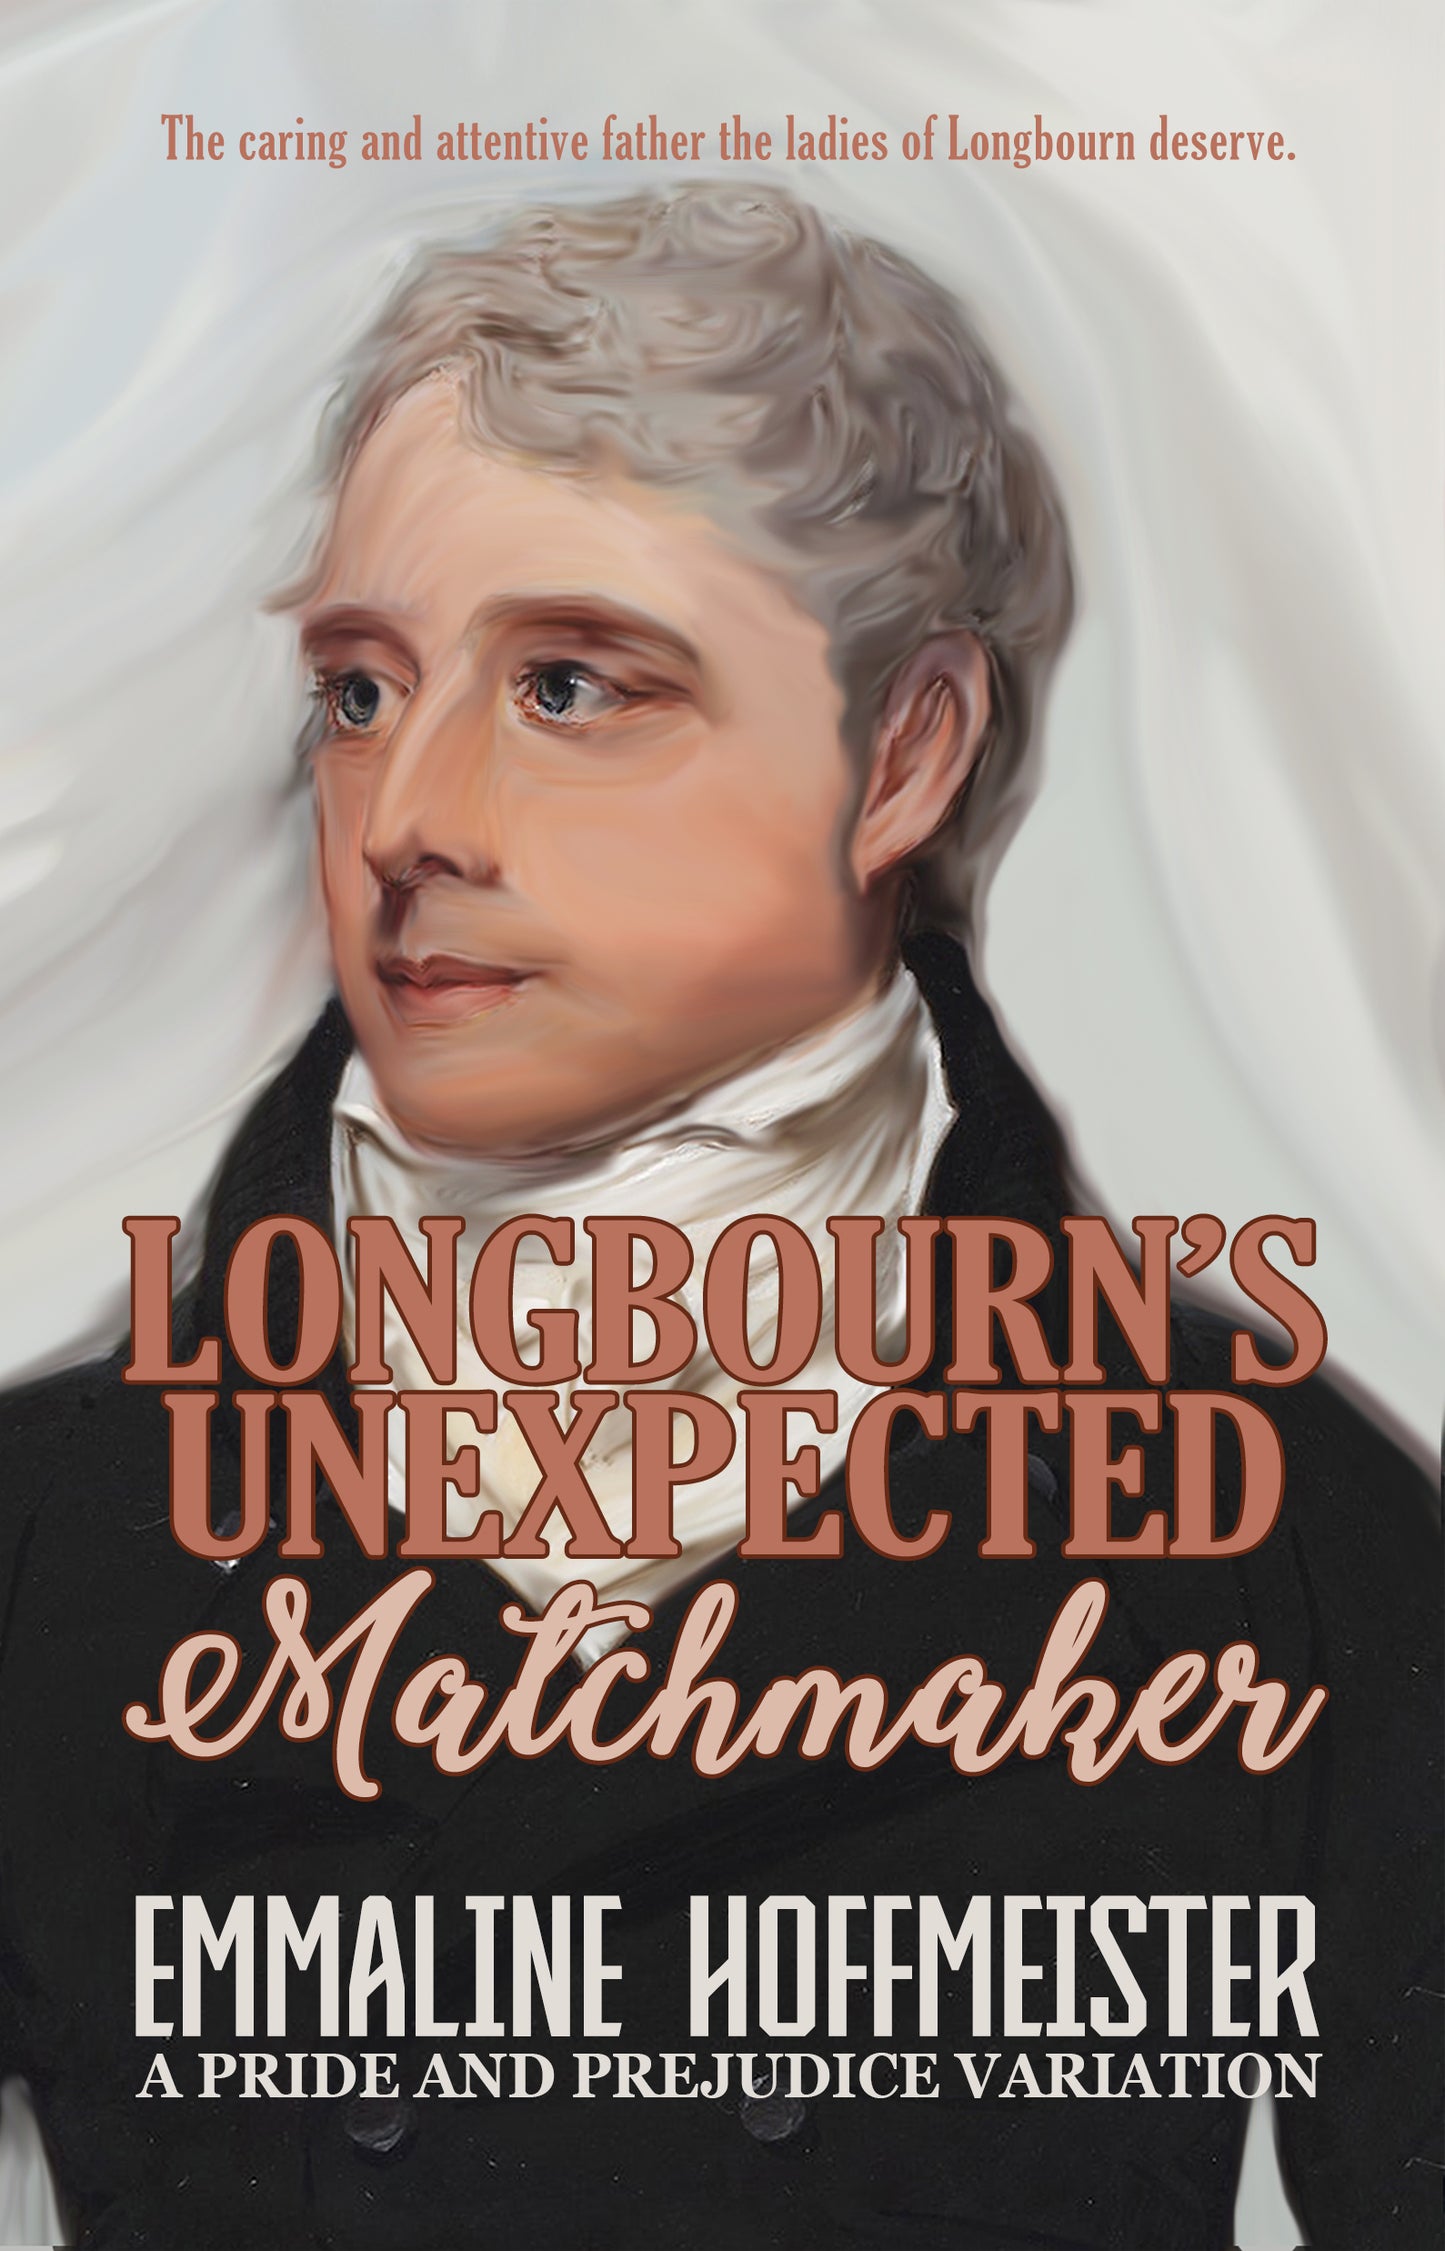 Longbourn'e Unexpected Matchmaker, A Pride and Prejudice Variation by Emmaline Hoffmeister Book Cover